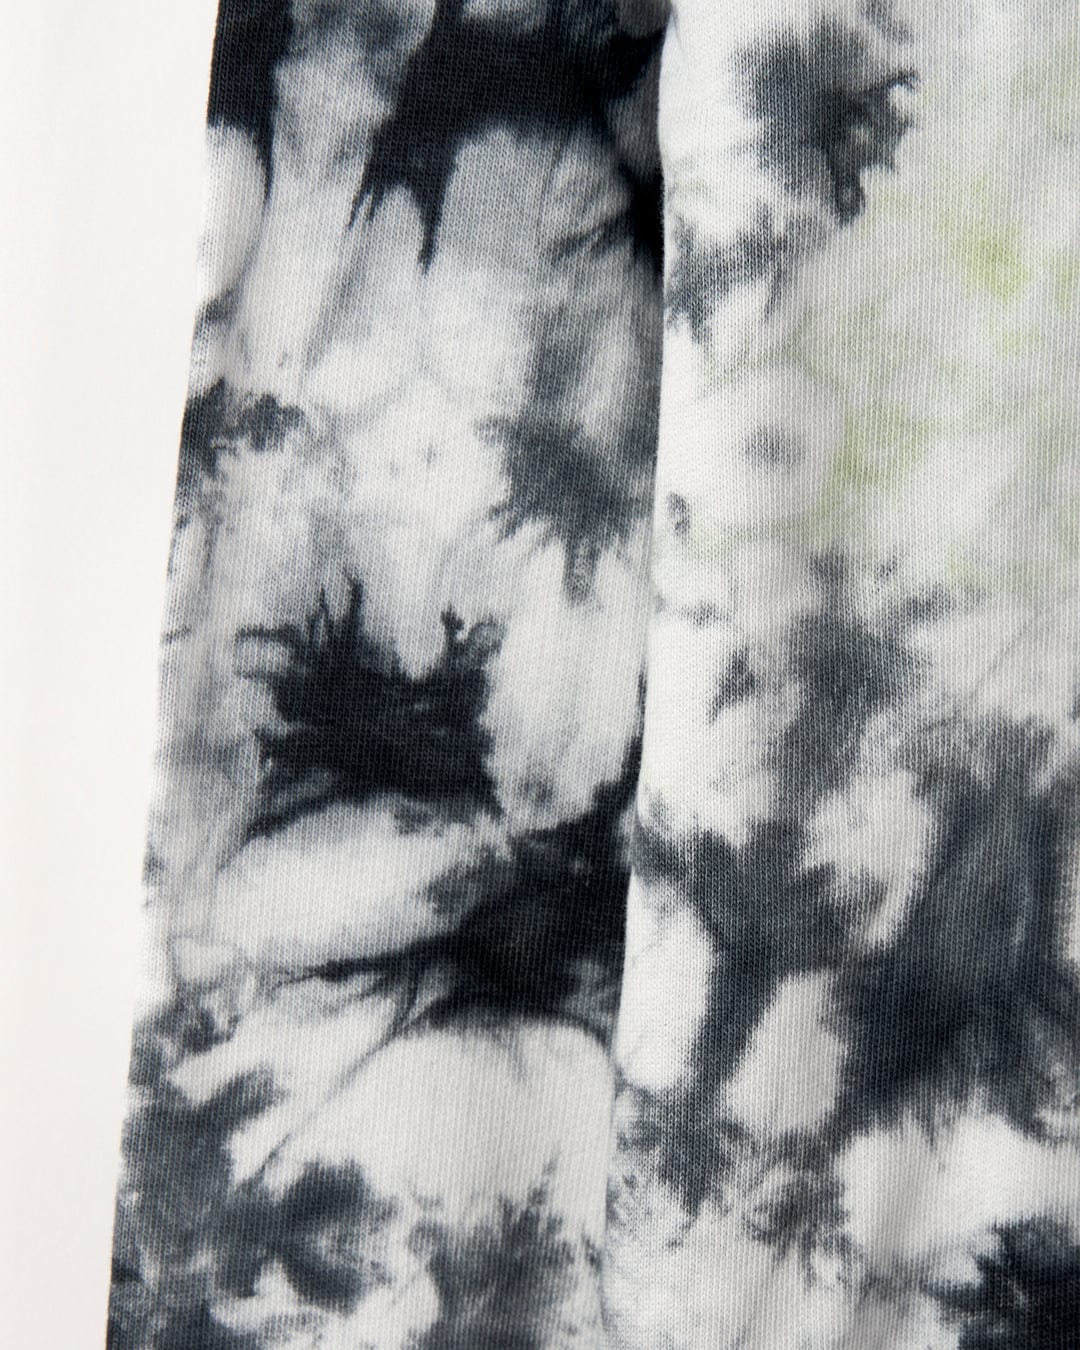 Close-up of a fabric with a black and white tie-dye pattern showing uneven and abstract shapes, complemented by subtle glow in the dark graphics of the Saltrock Las Vegas Smackdown - Kids Glow in the Dark Oversized Pop Hoodie - Multi.